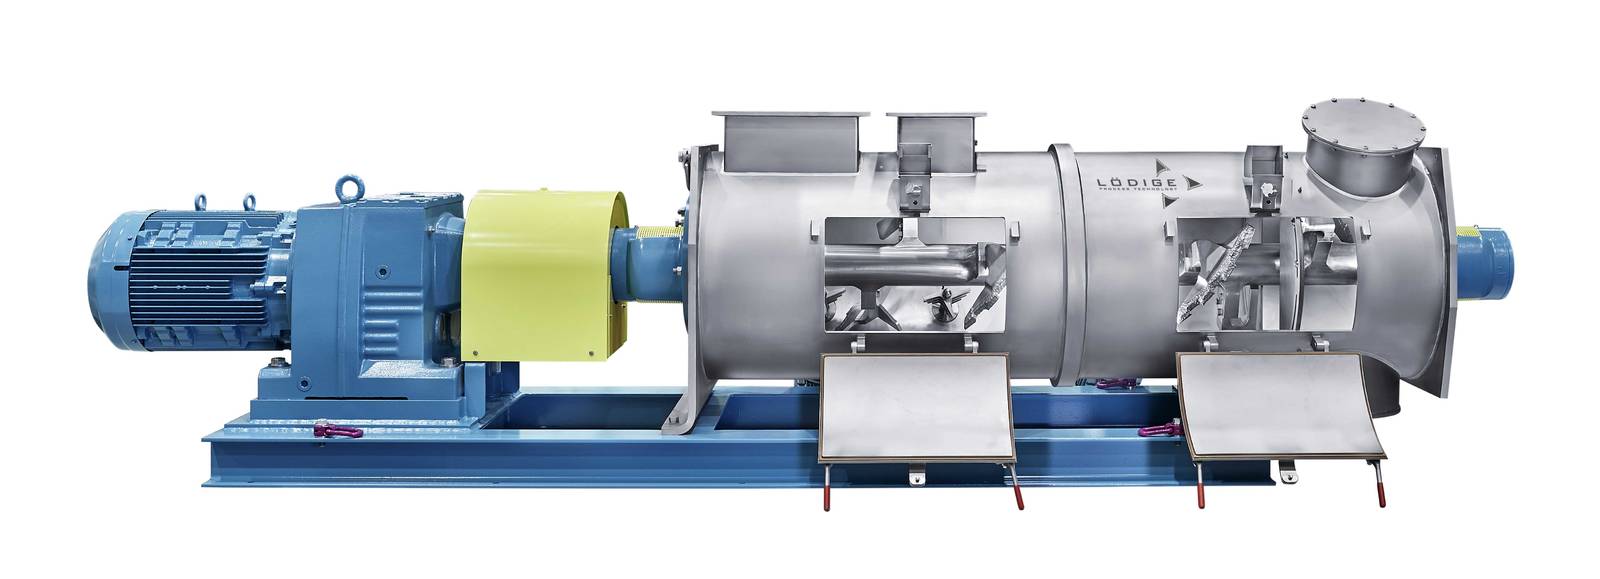 The continuous Ploughshare® mixers of the KM series are particularly suitable for environmental engineering applications. (Source: Lödige)